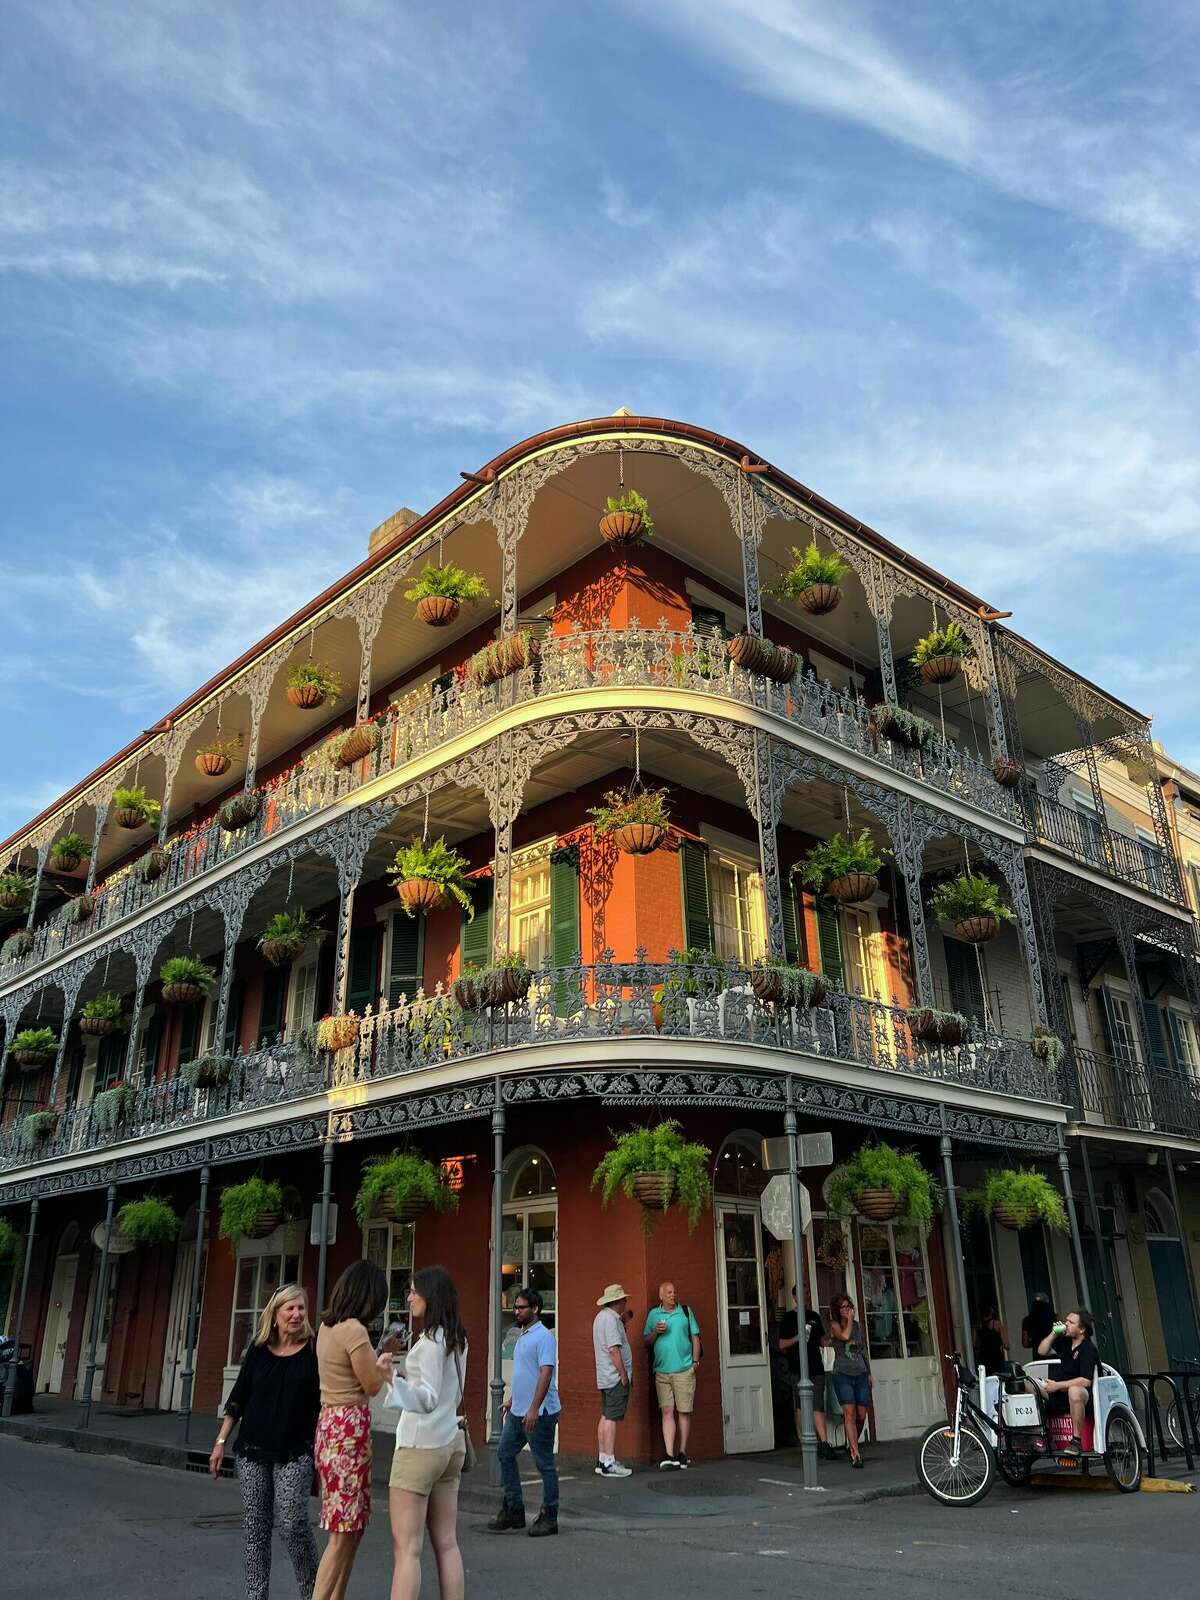 The lace-like details of the buildings in New Orlean's French Quarter.